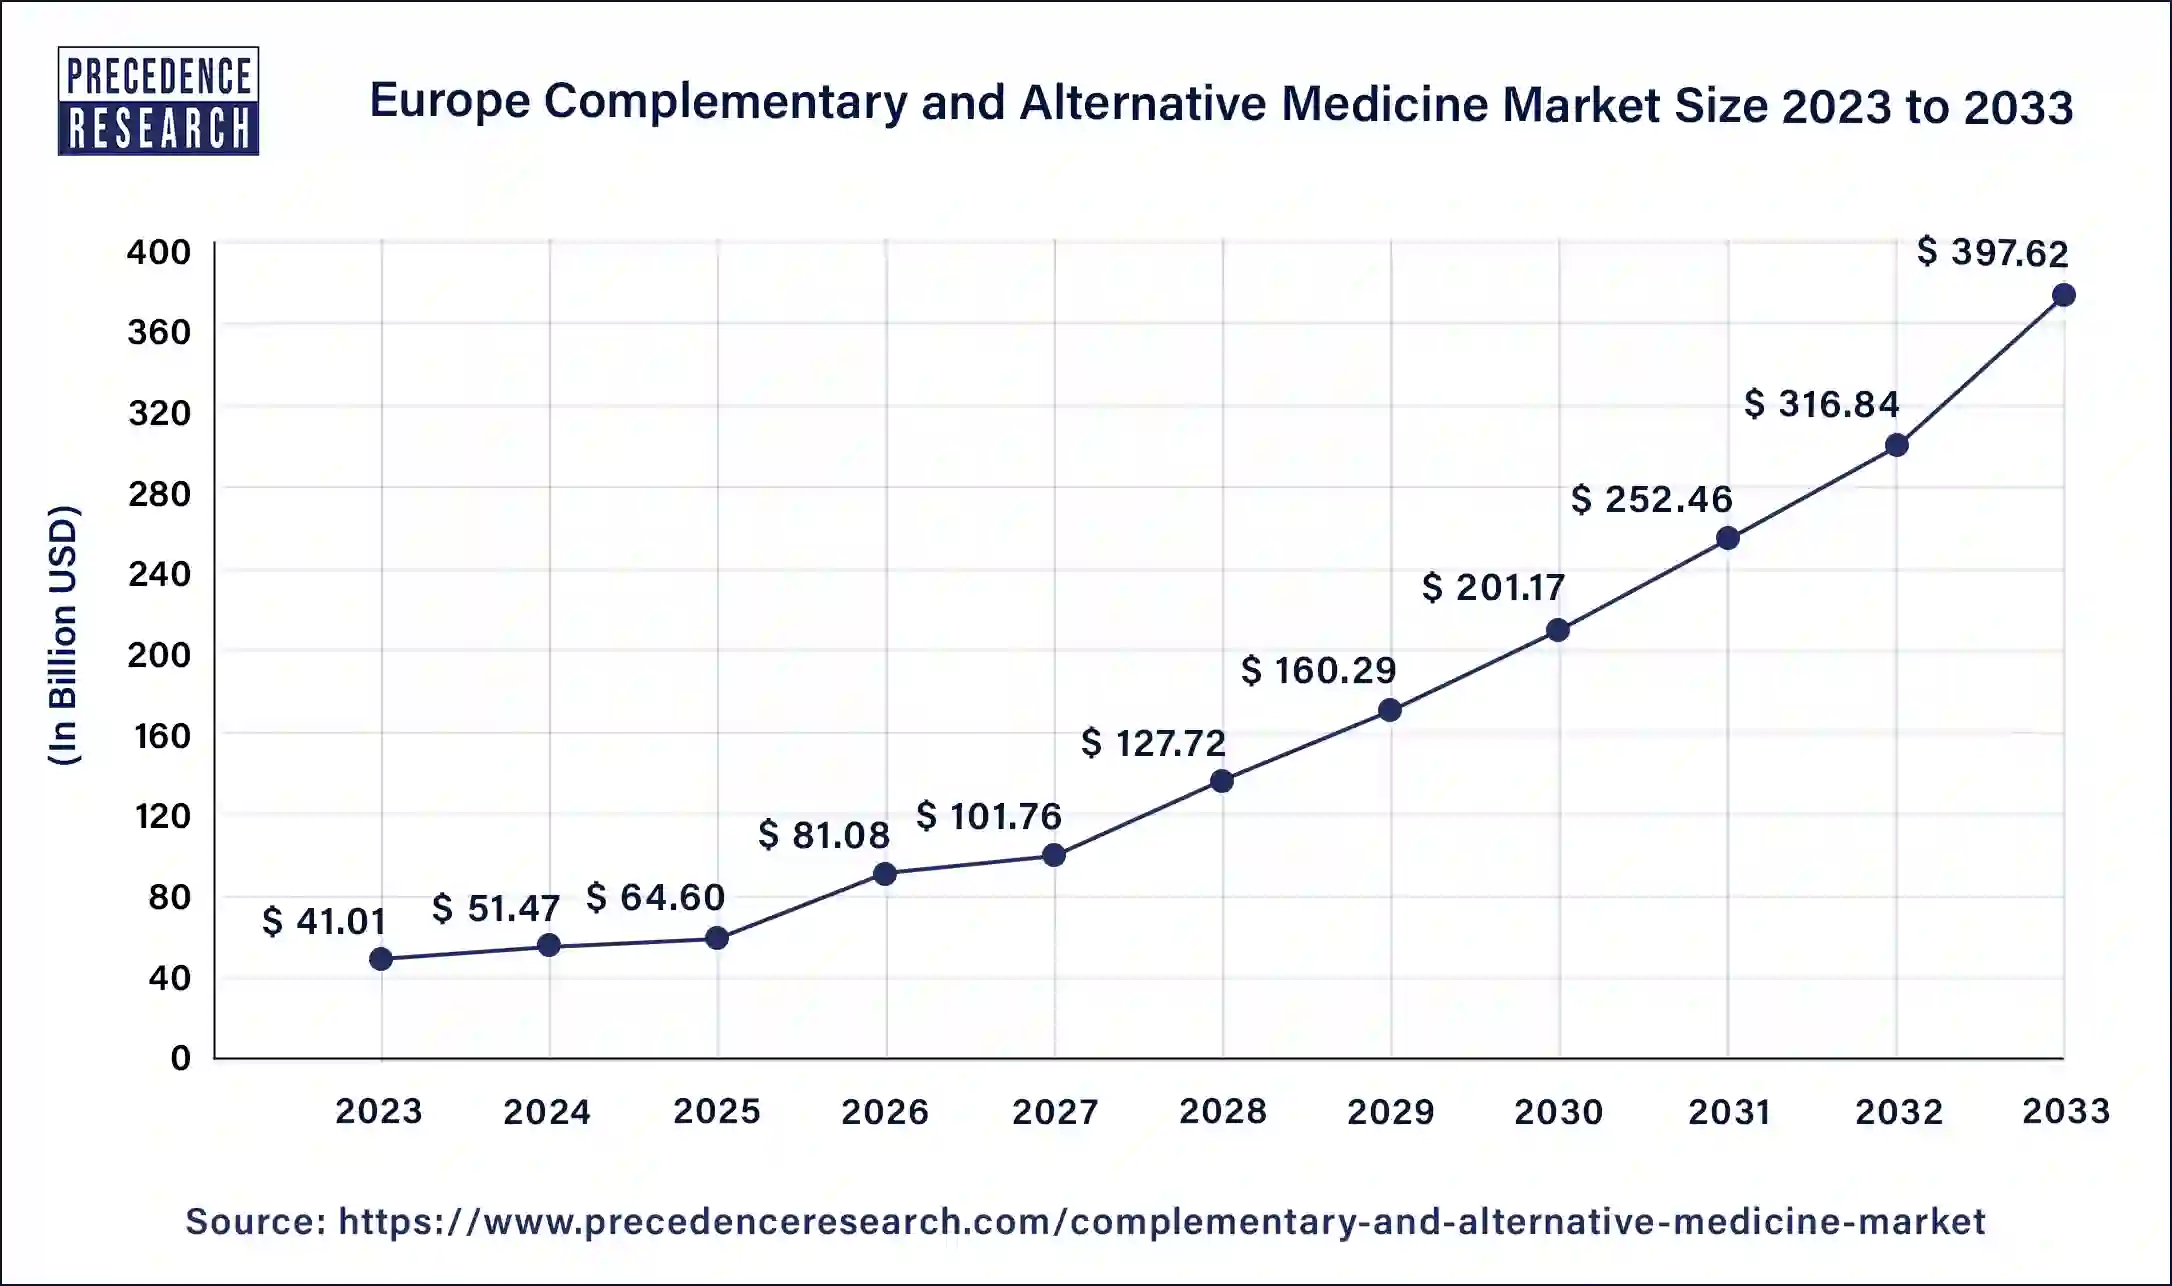 Europe Complementary and Alternative Medicine Market Size 2024 to 2033